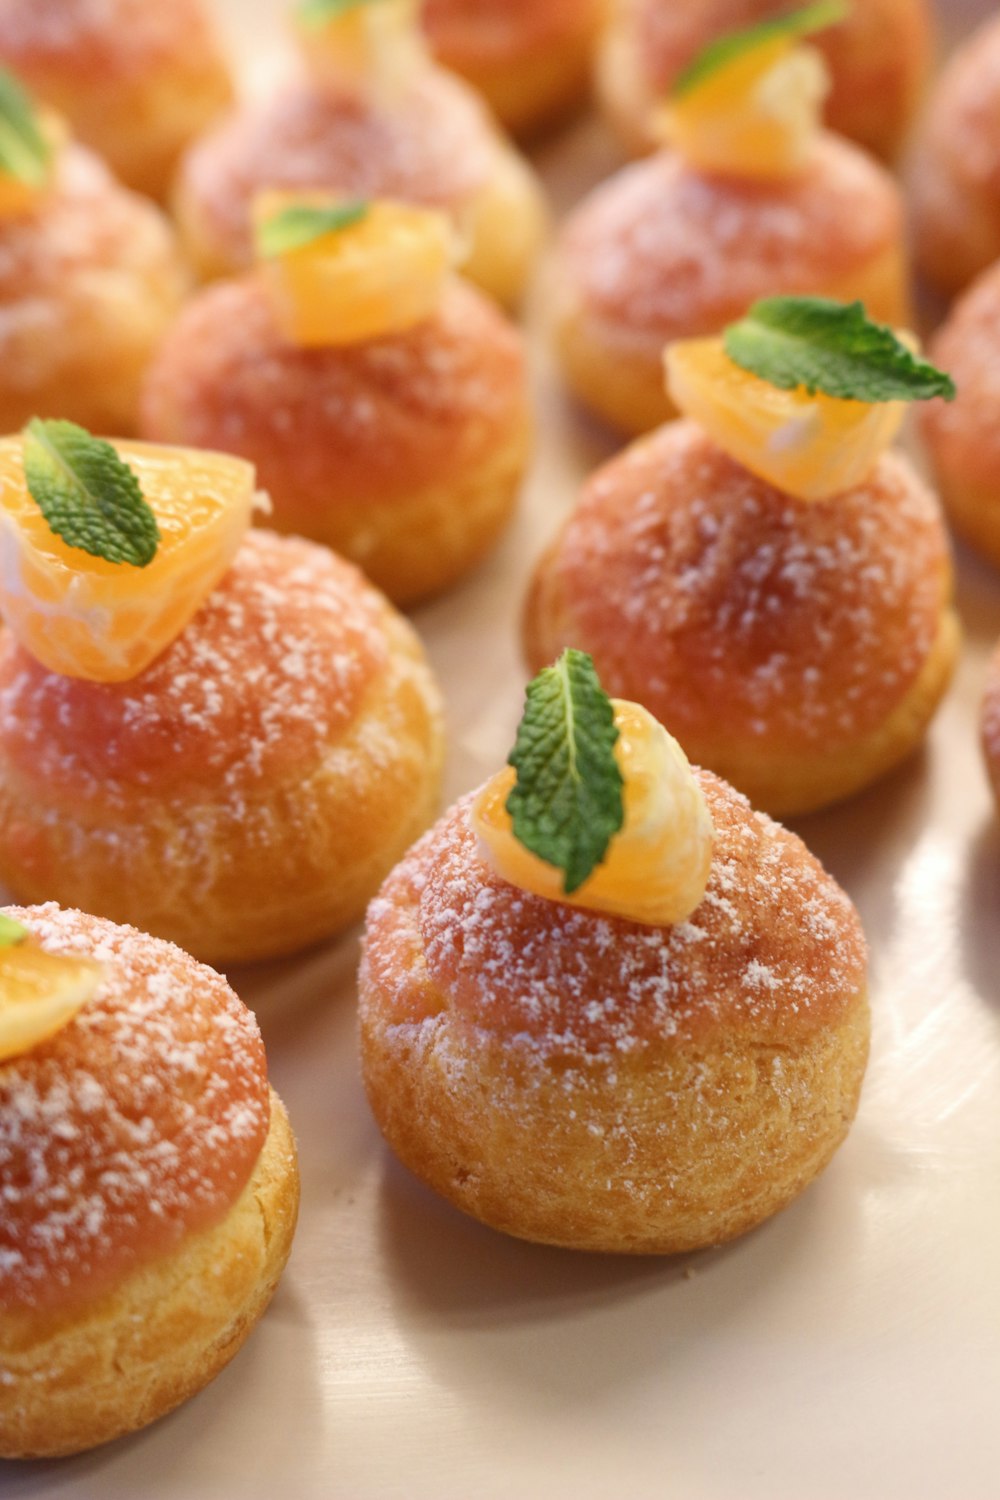 a close up of small pastries on a plate